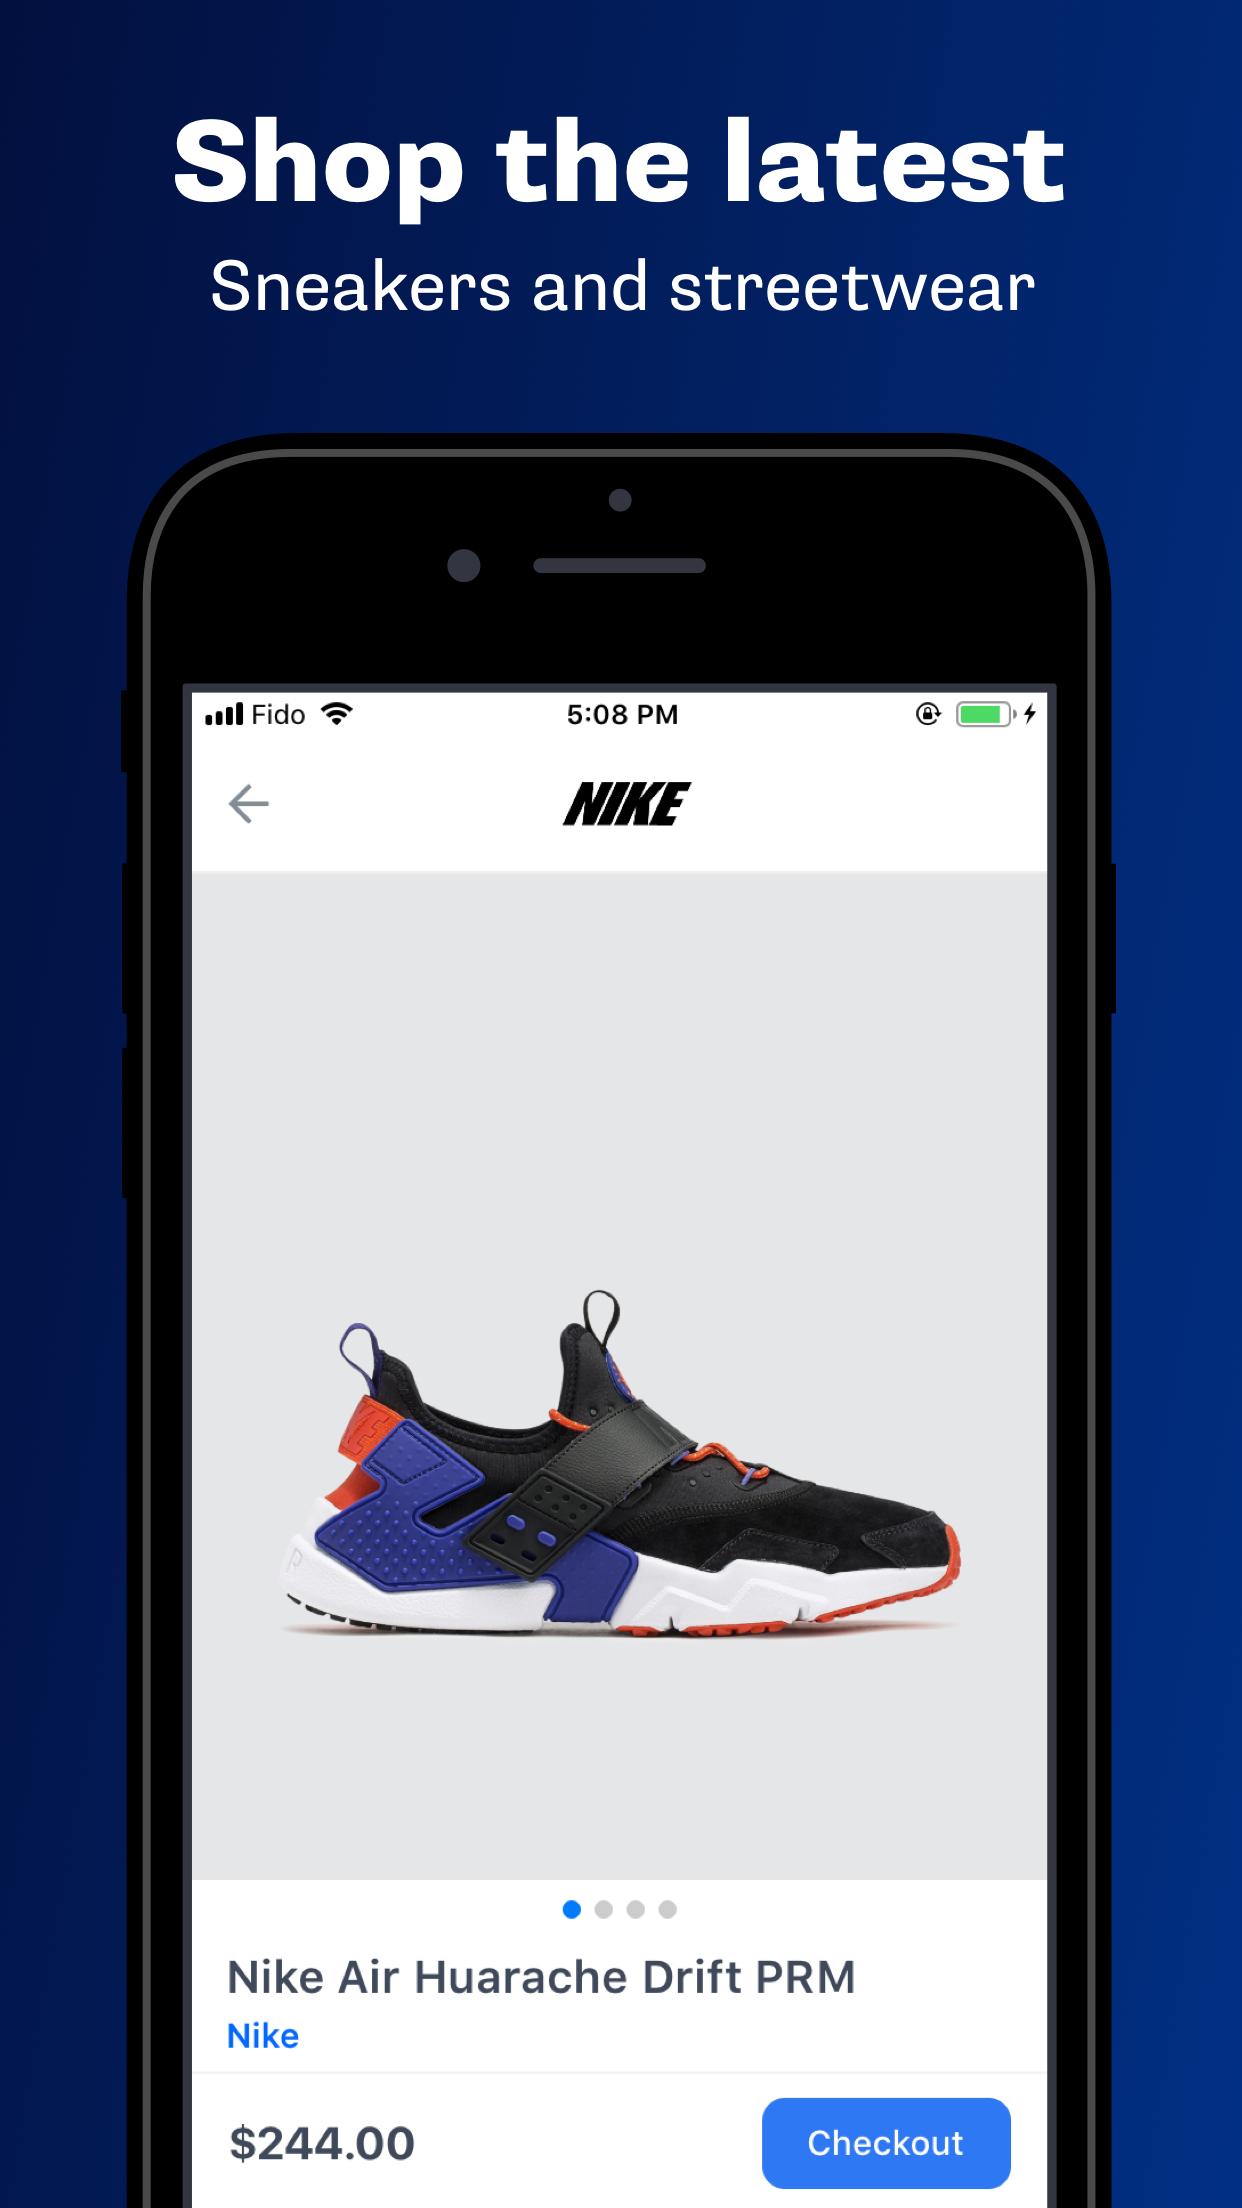 Men's Clothing, Sneaker News & Fashion - Bonsai for Android - APK Download